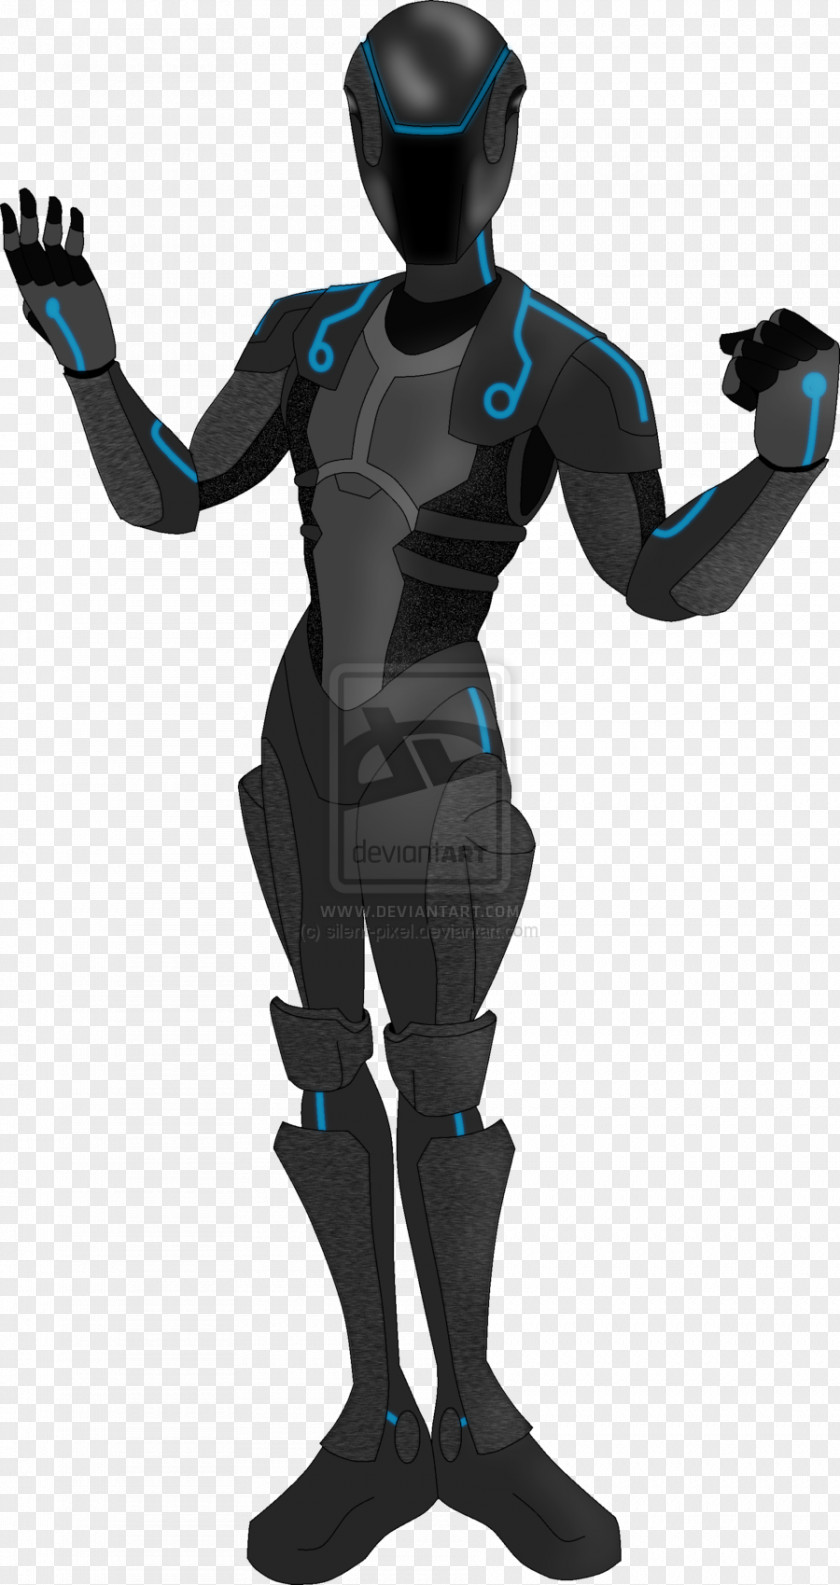 Tron Character Arm Malcolm Merlyn Shoulder PNG